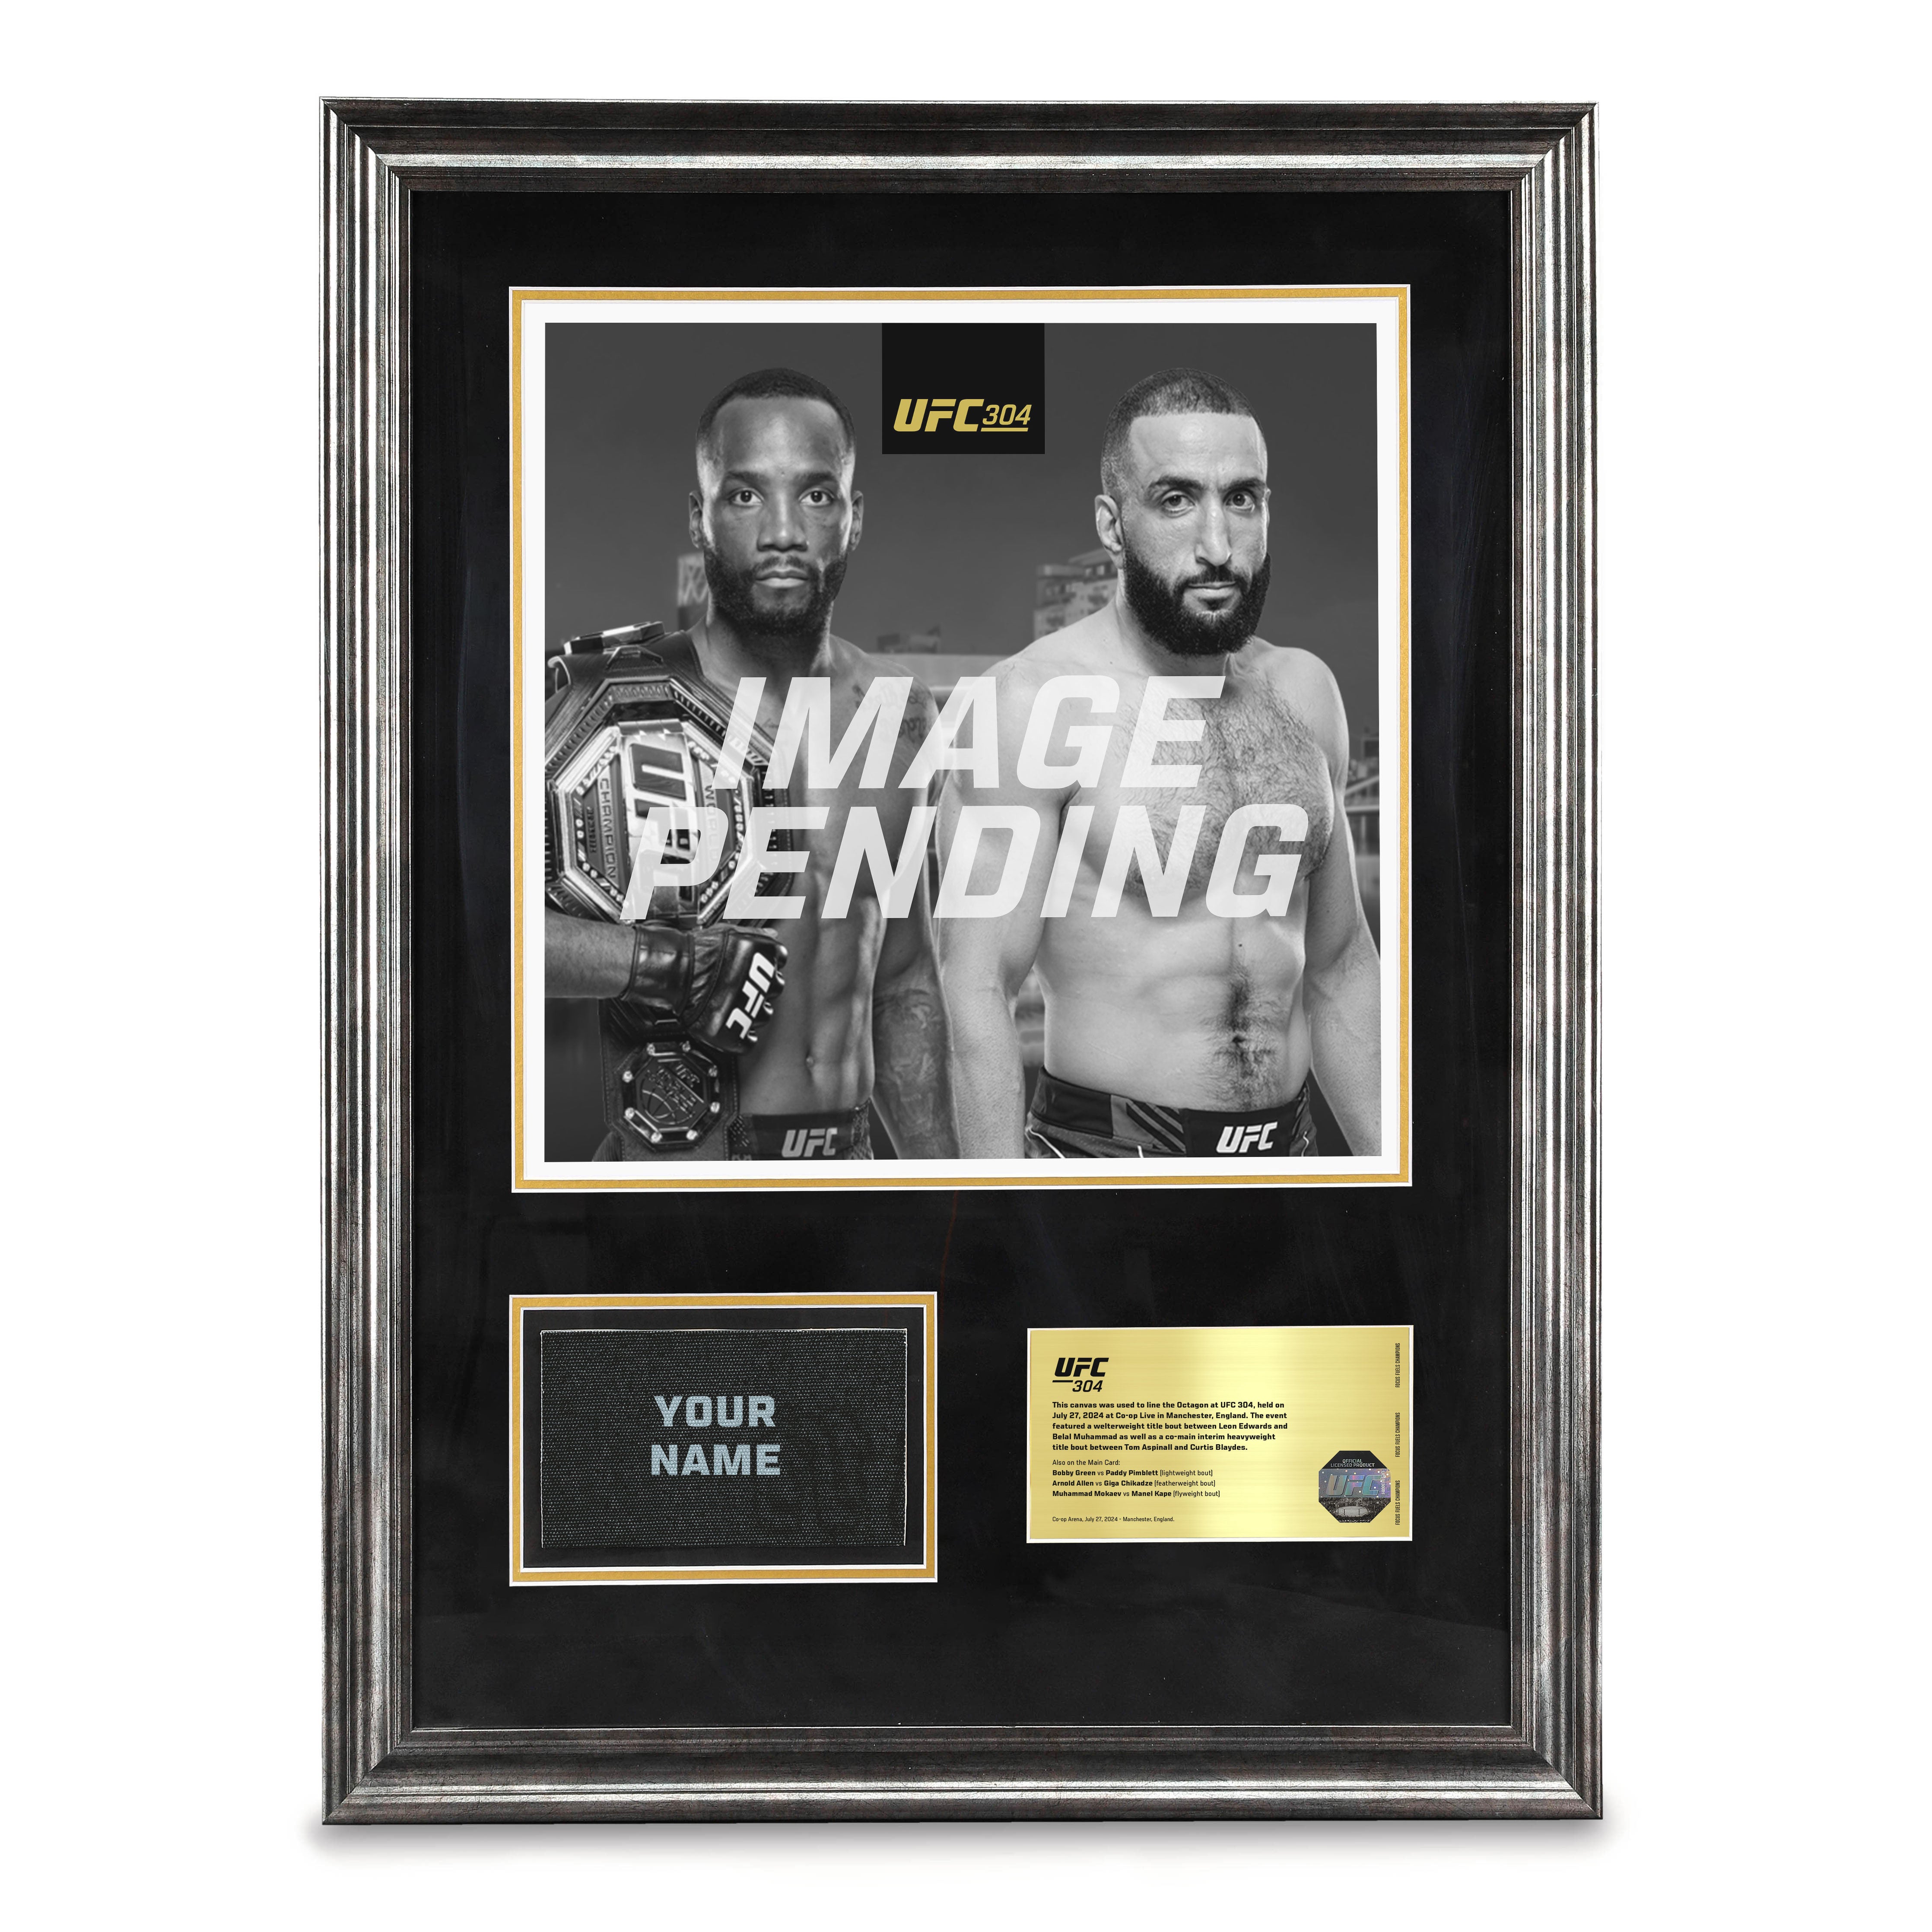 SOLD OUT: UFC 304 Edwards vs Muhammad 2 Name on Canvas